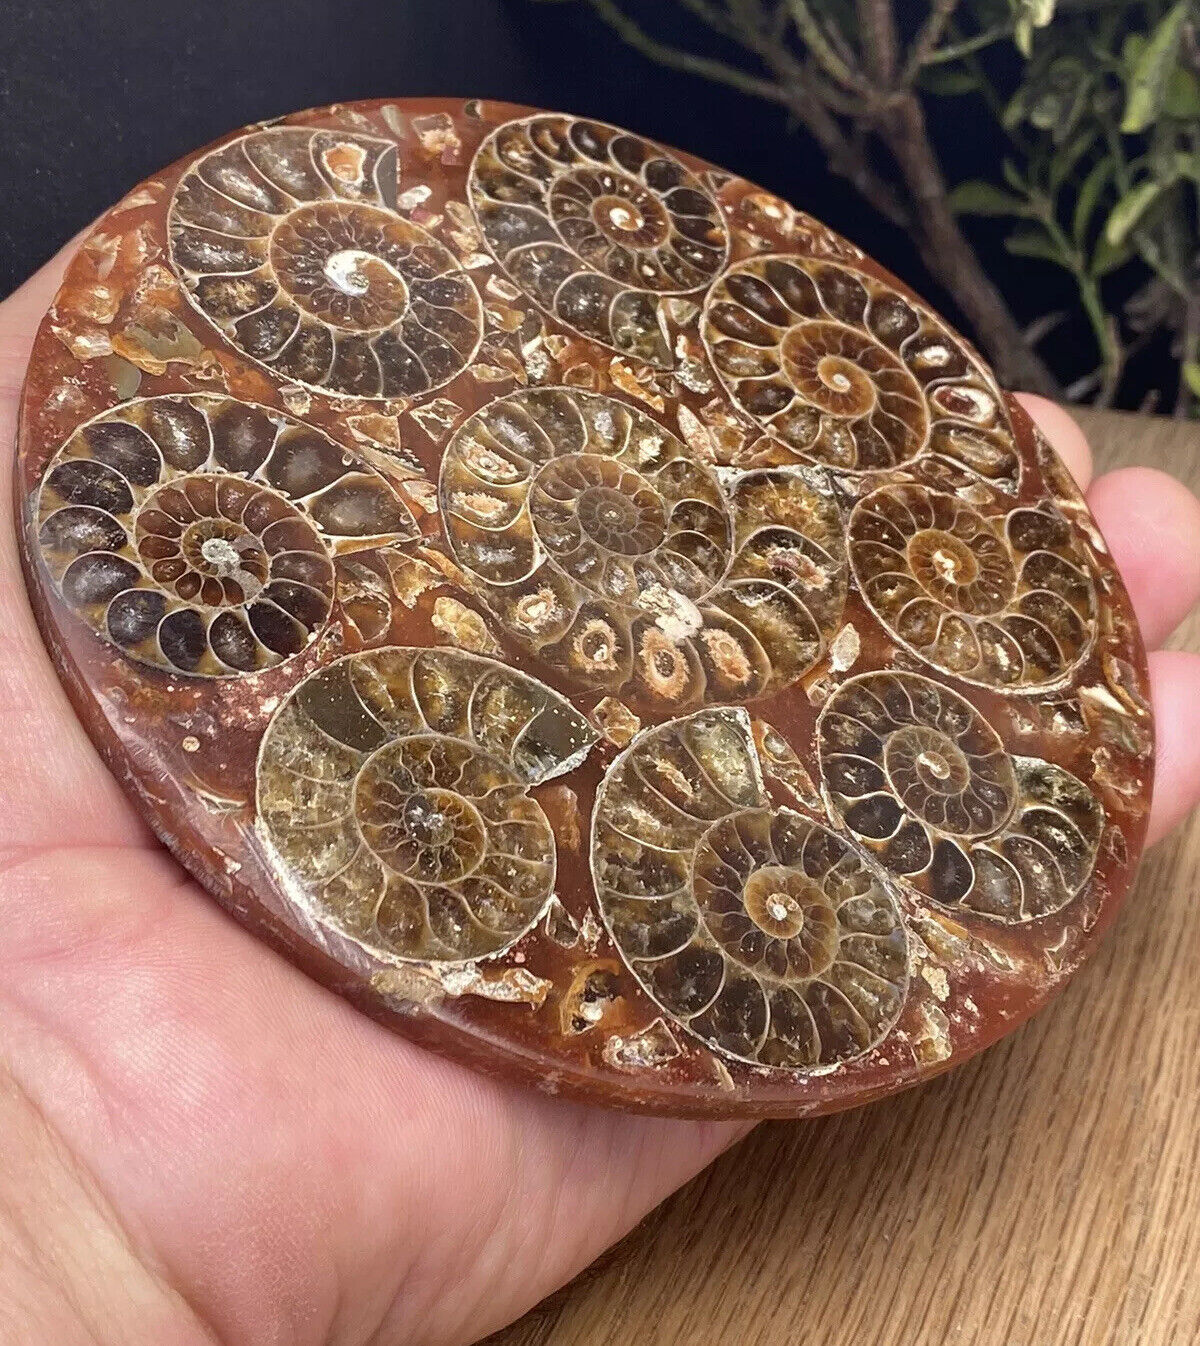 Large Fossil Disc With Natural Conch 416 Million Year Old Crystal Ammonites